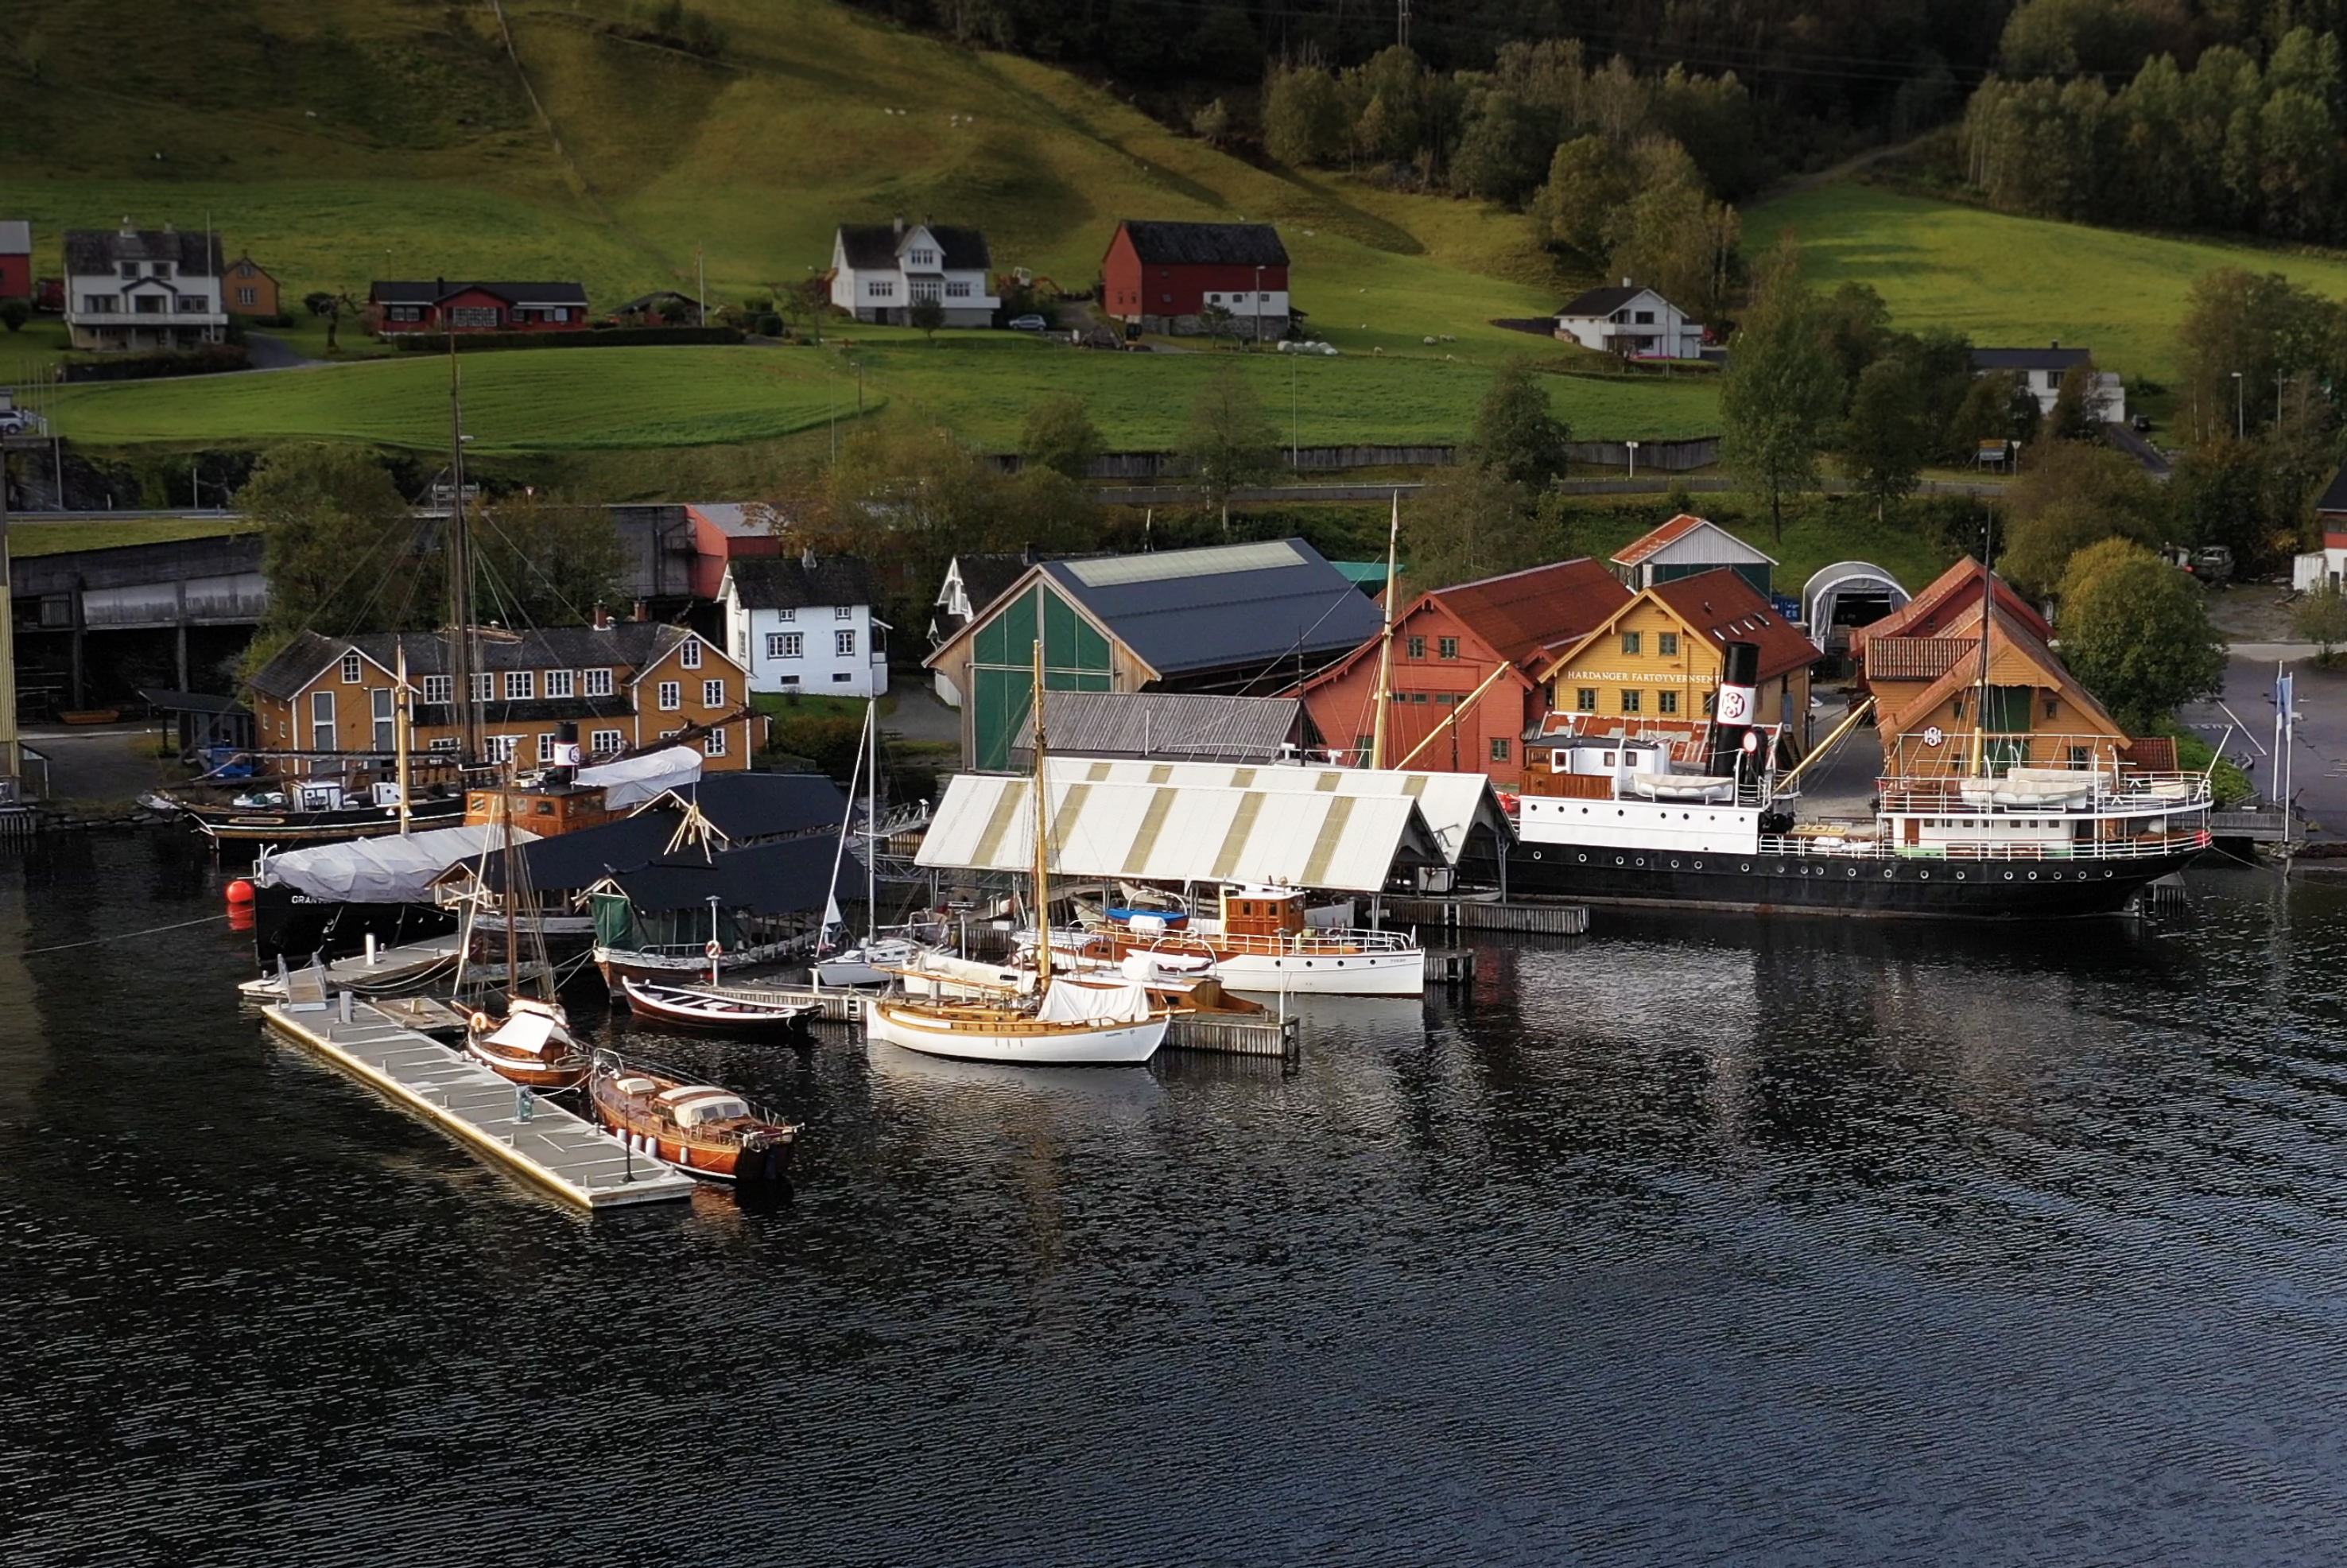 Guided tour at Hardanger Maritime Centre